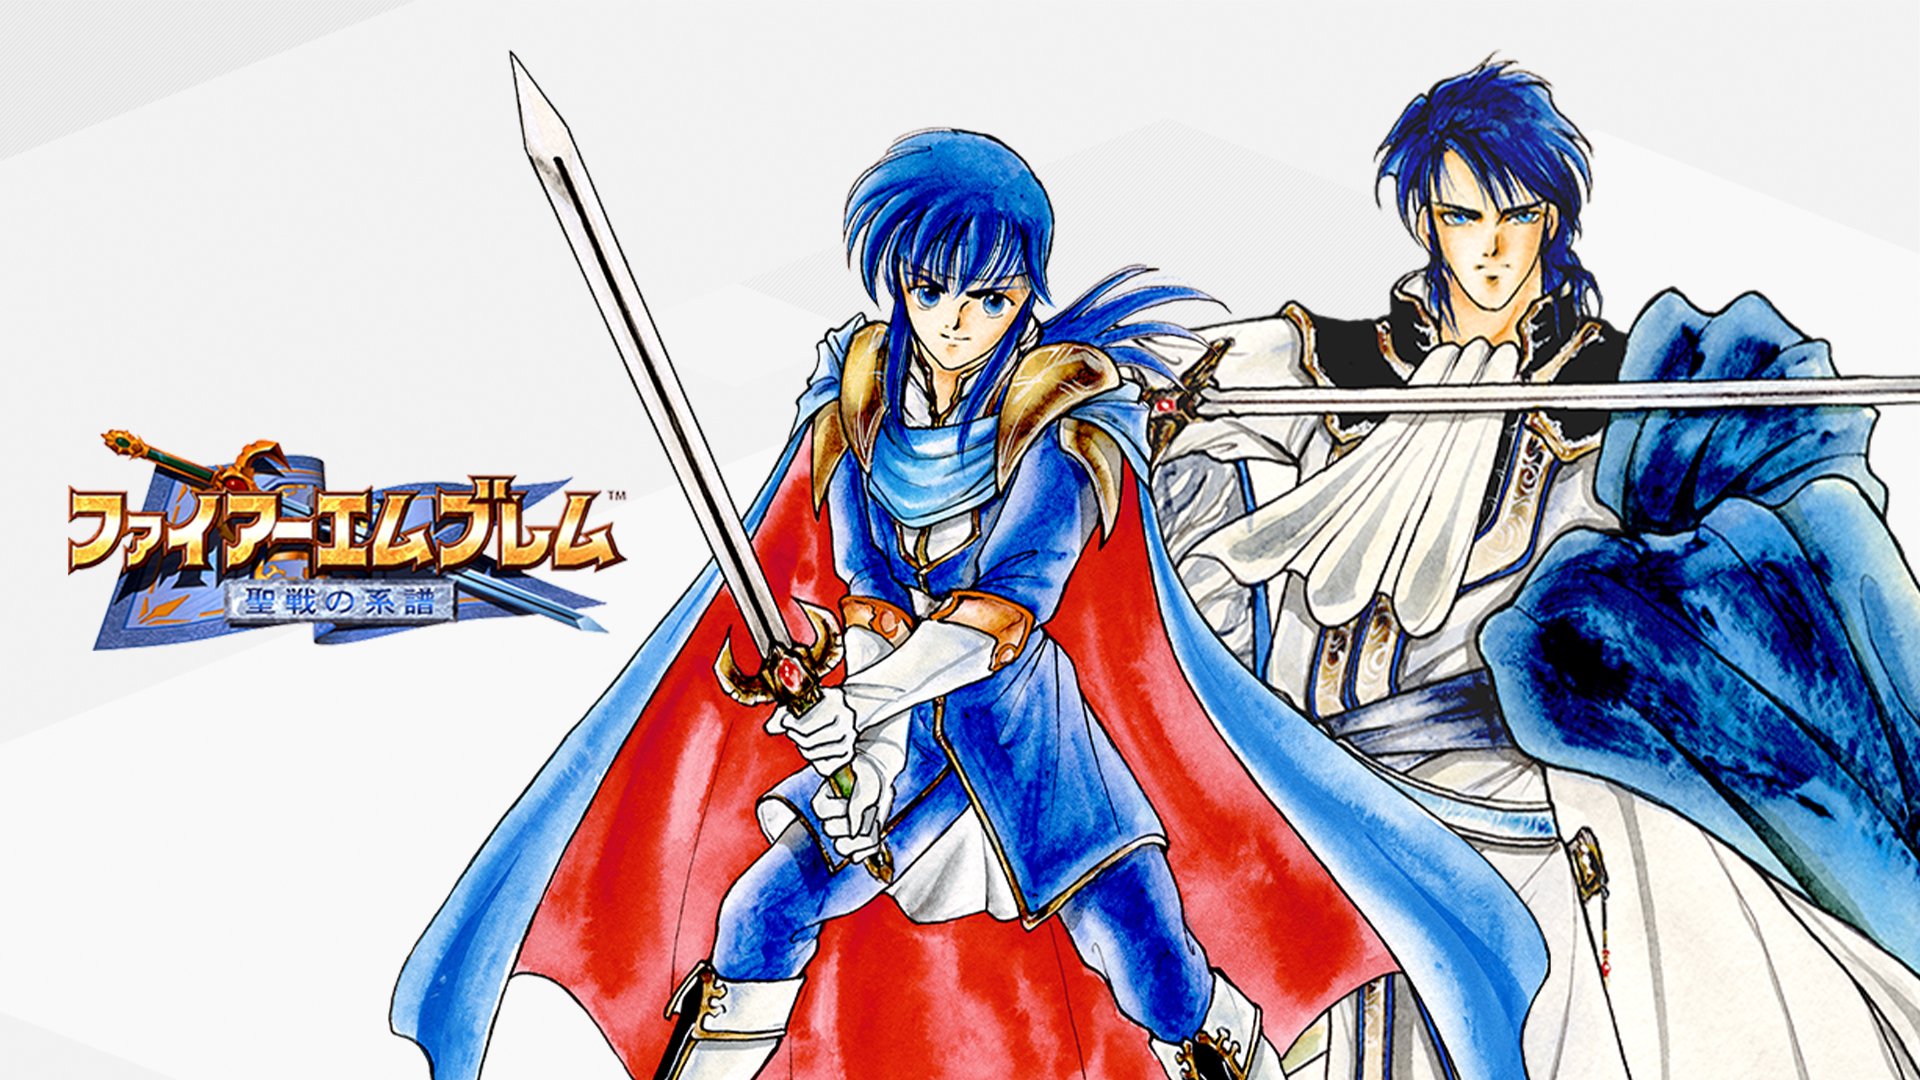 Fire Emblem website adds Genealogy of the Holy War character section